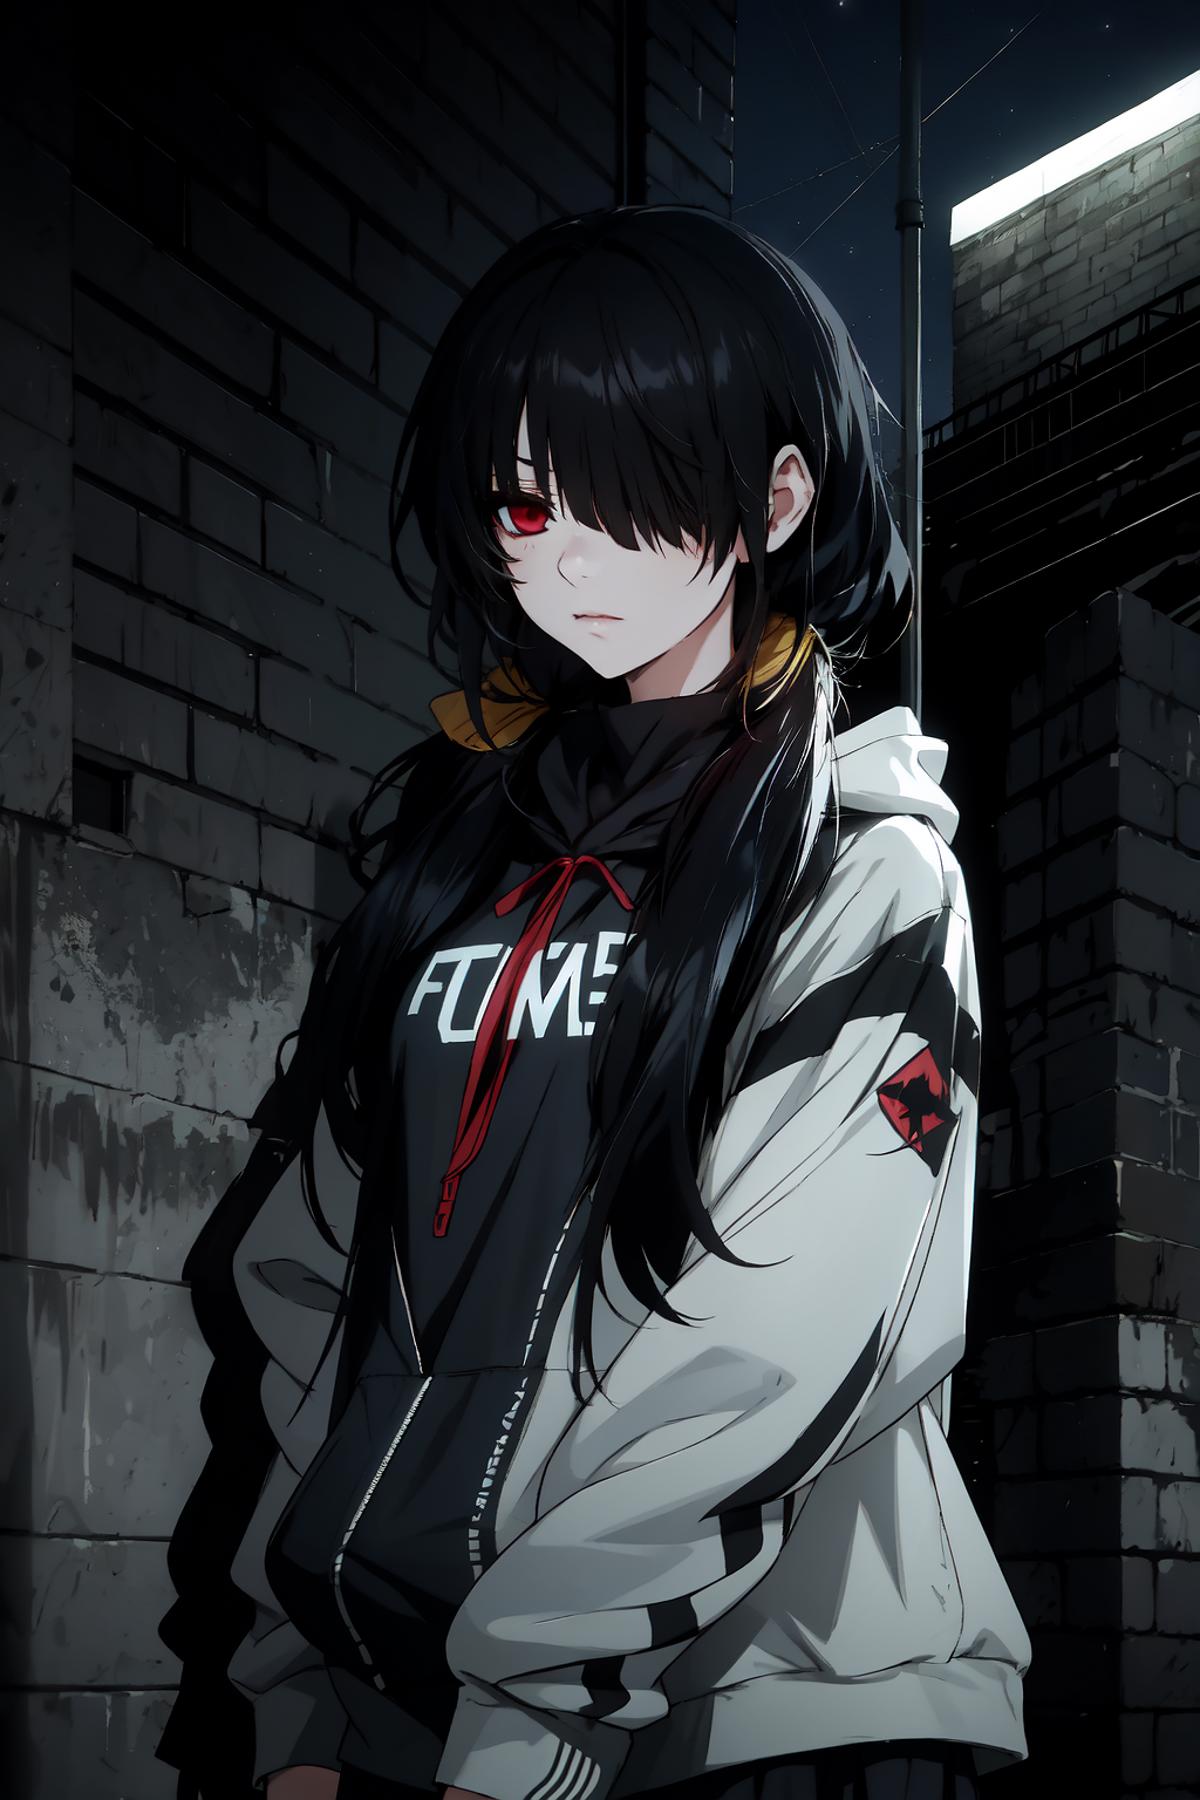 Lycoris Hoodies - an EDG collection image by FallenIncursio